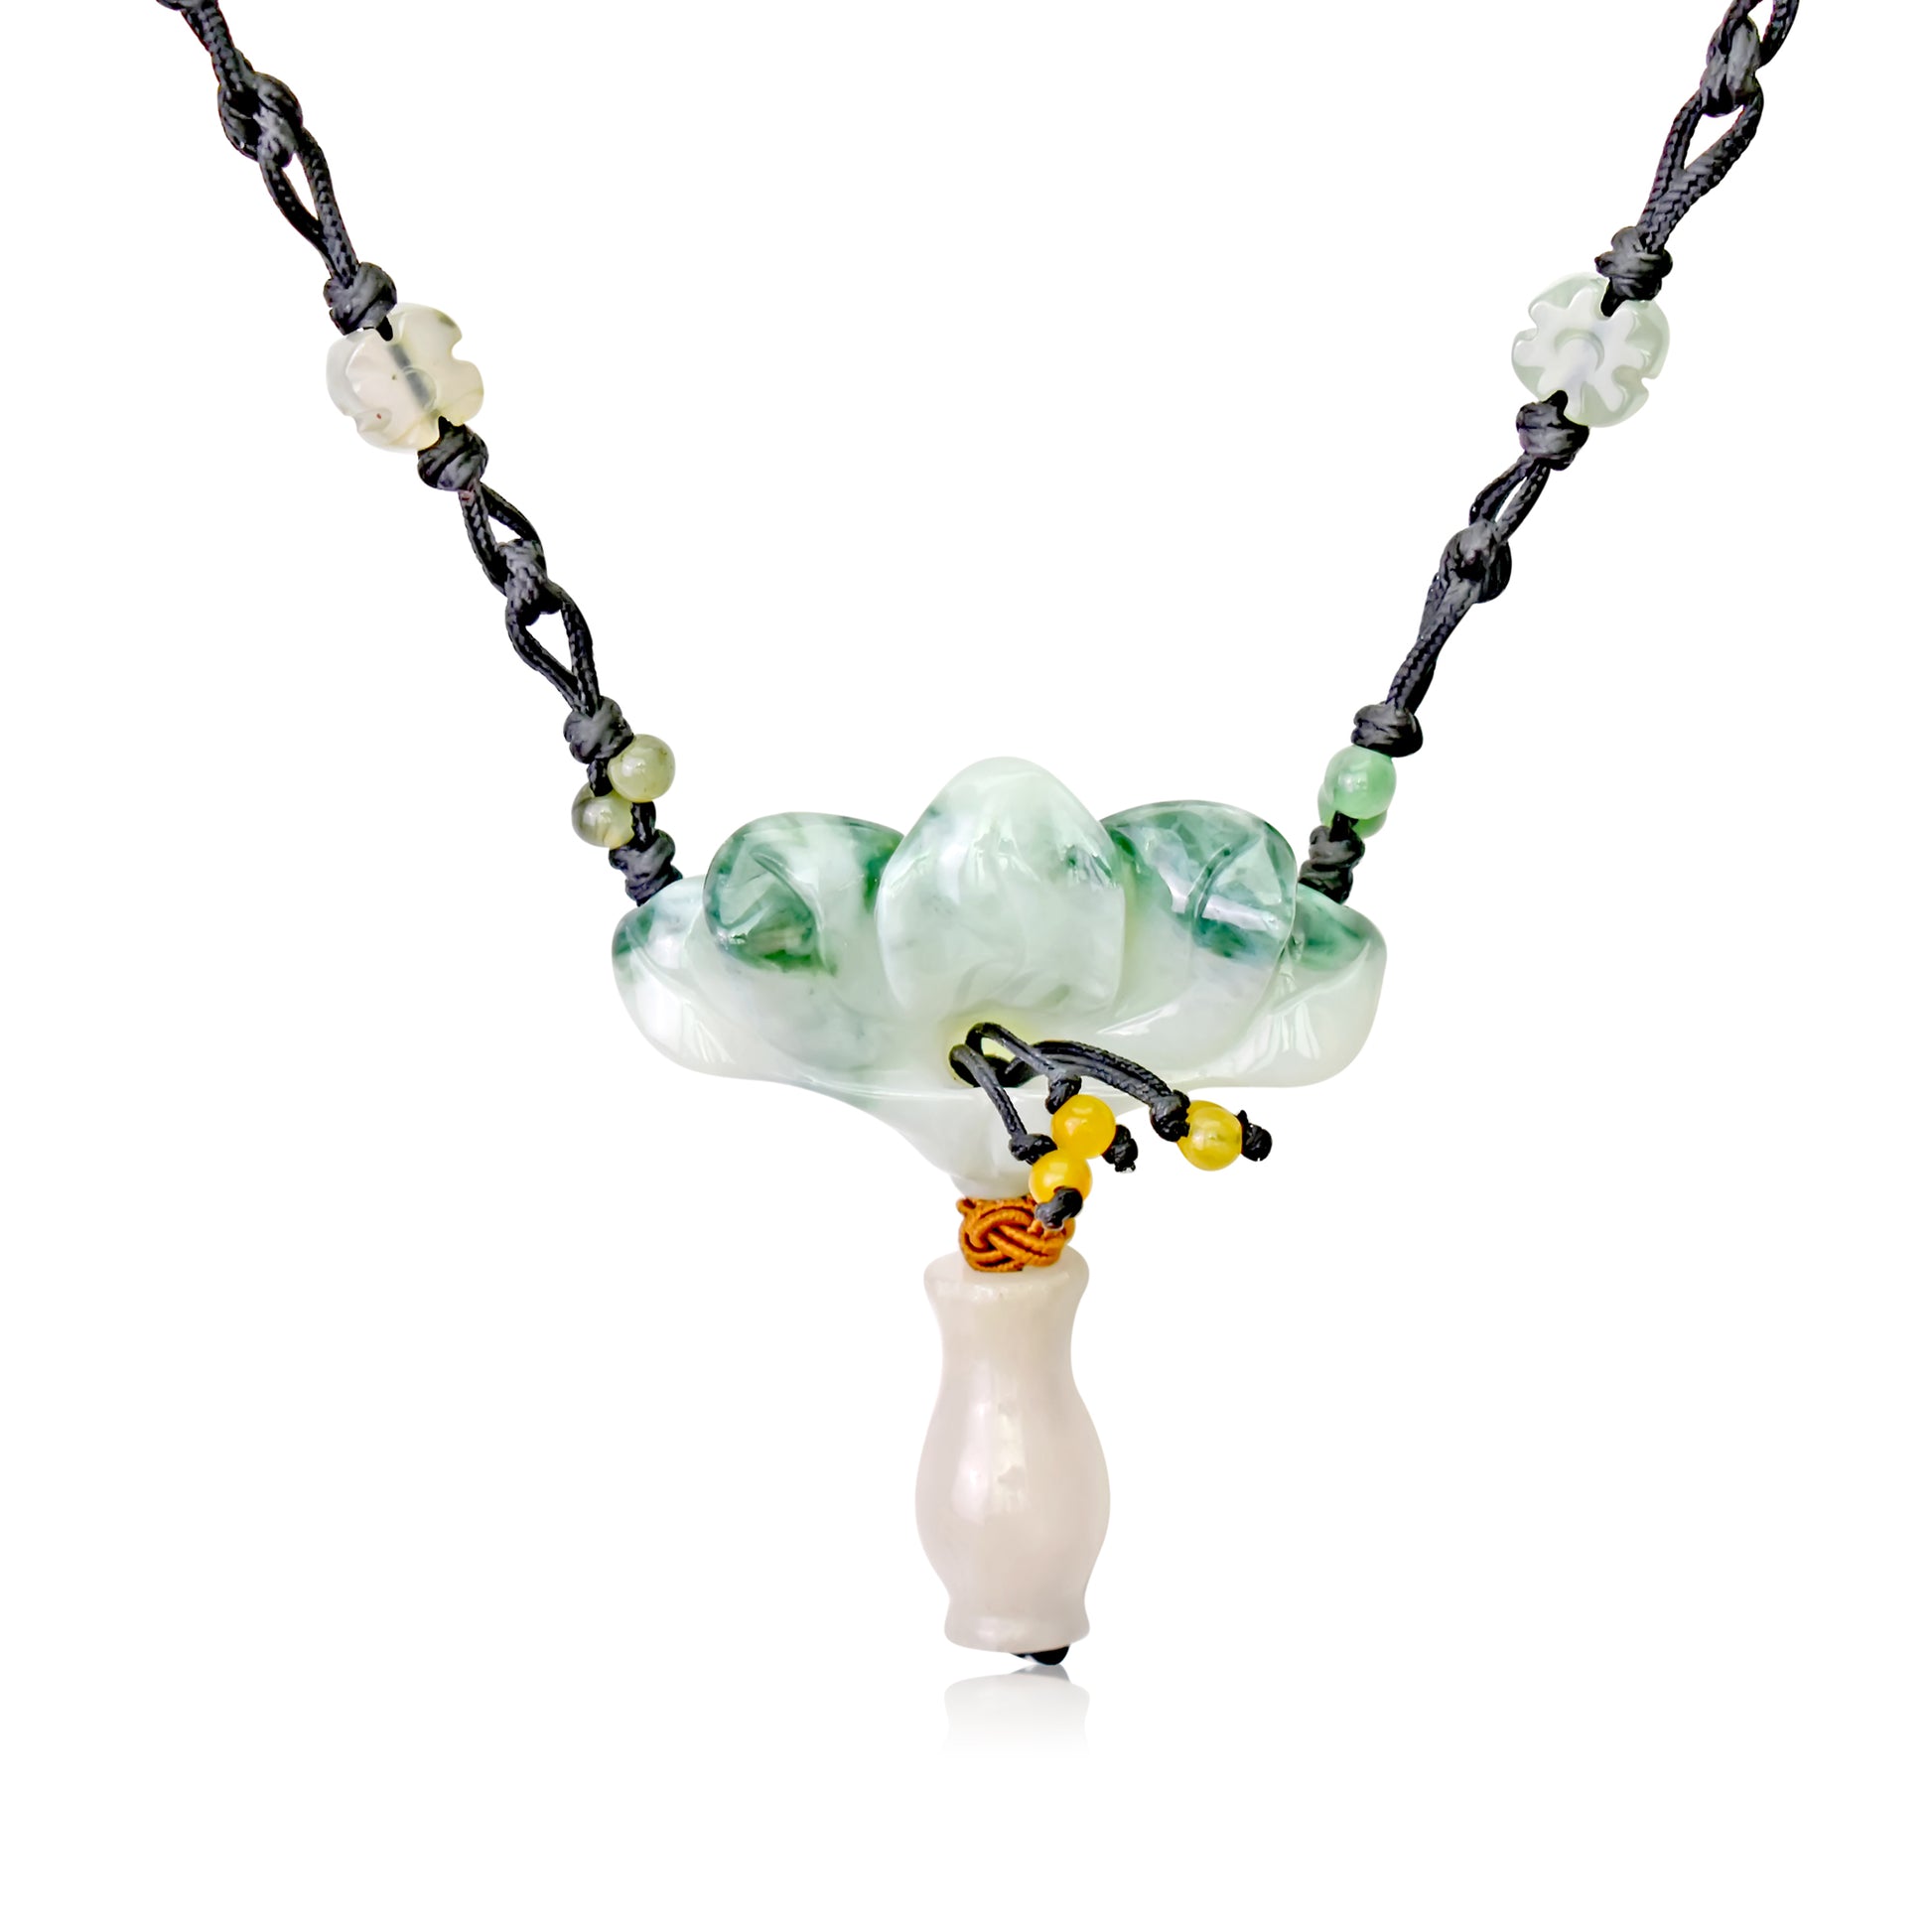 Achieve Beauty and Integrity with Peacock Flower Jade Necklace made with Black Cord